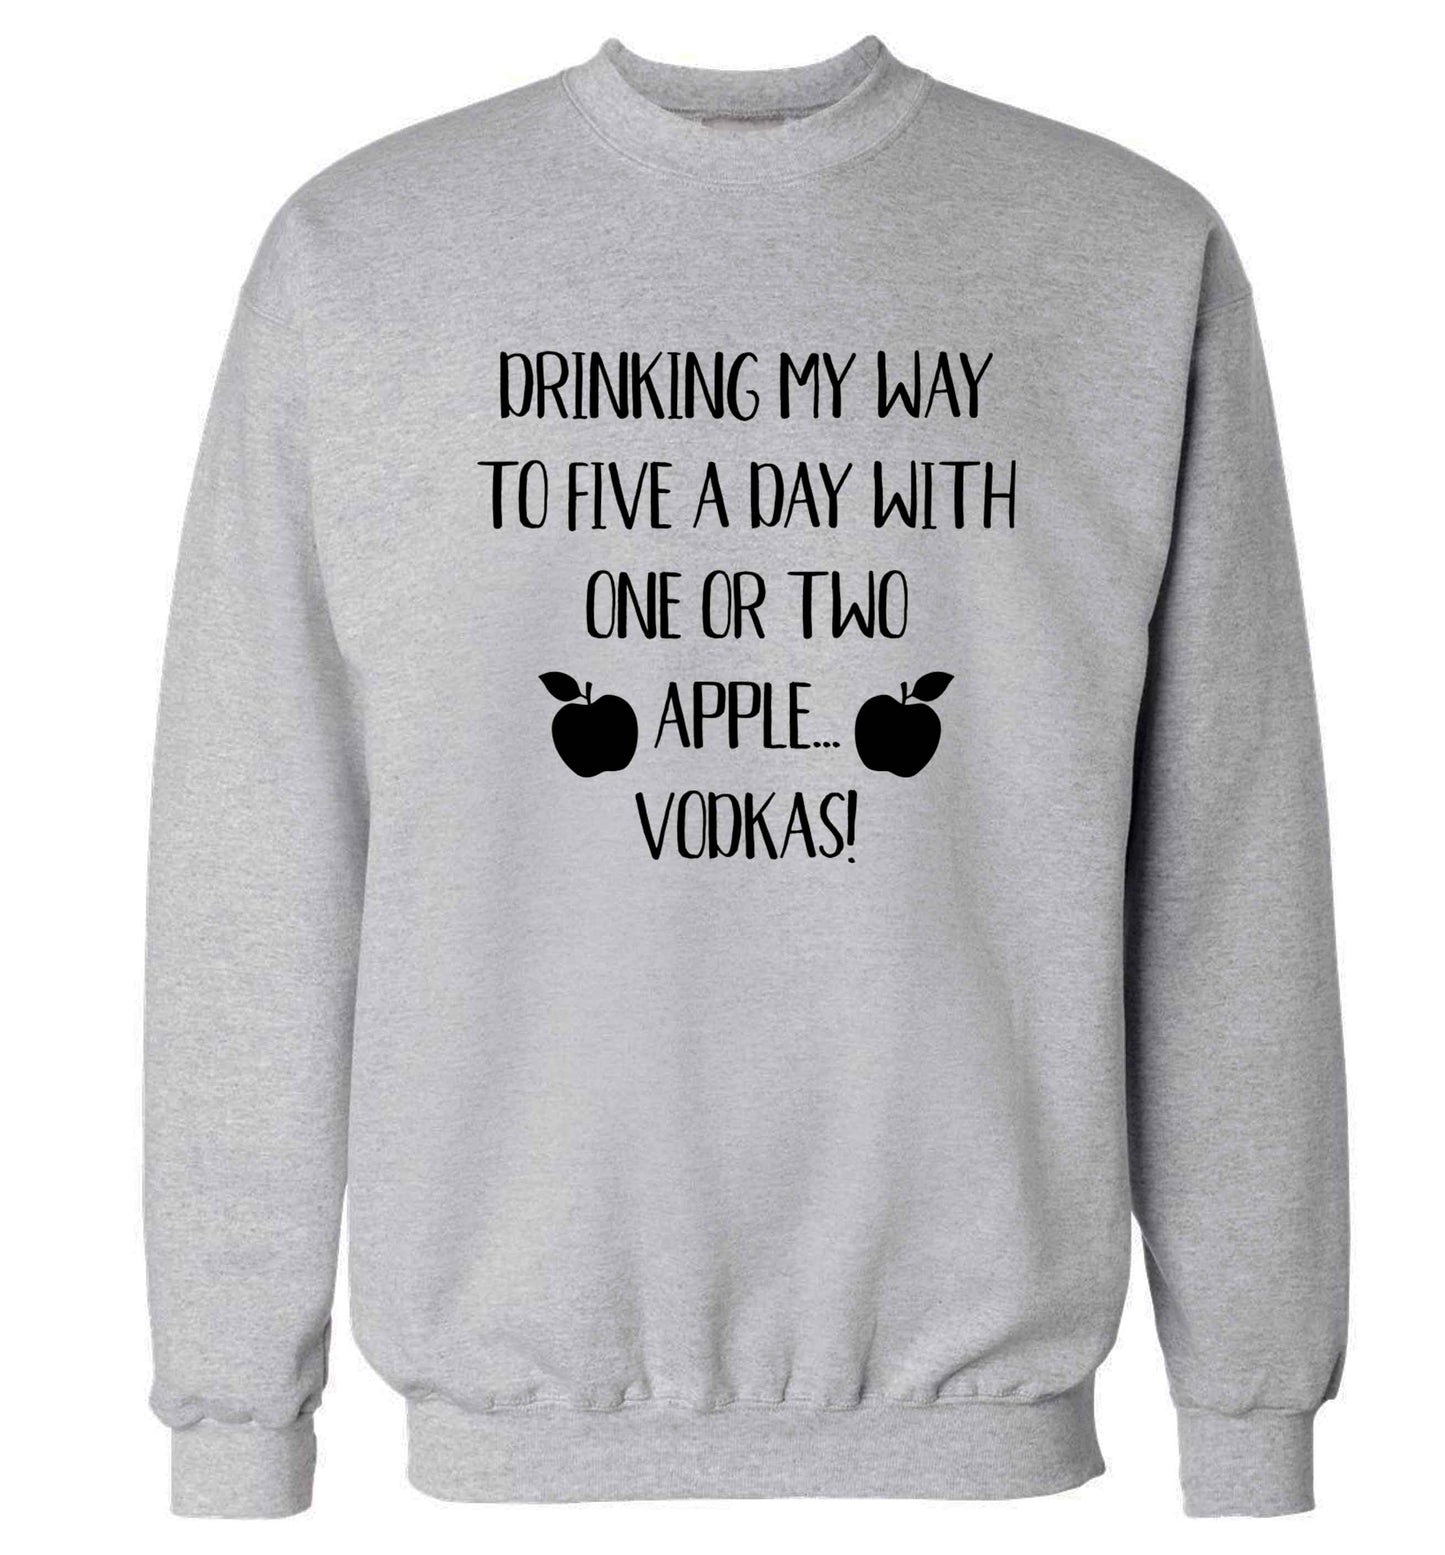 Drinking my way to five a day with one or two apple vodkas Adult's unisex grey Sweater 2XL